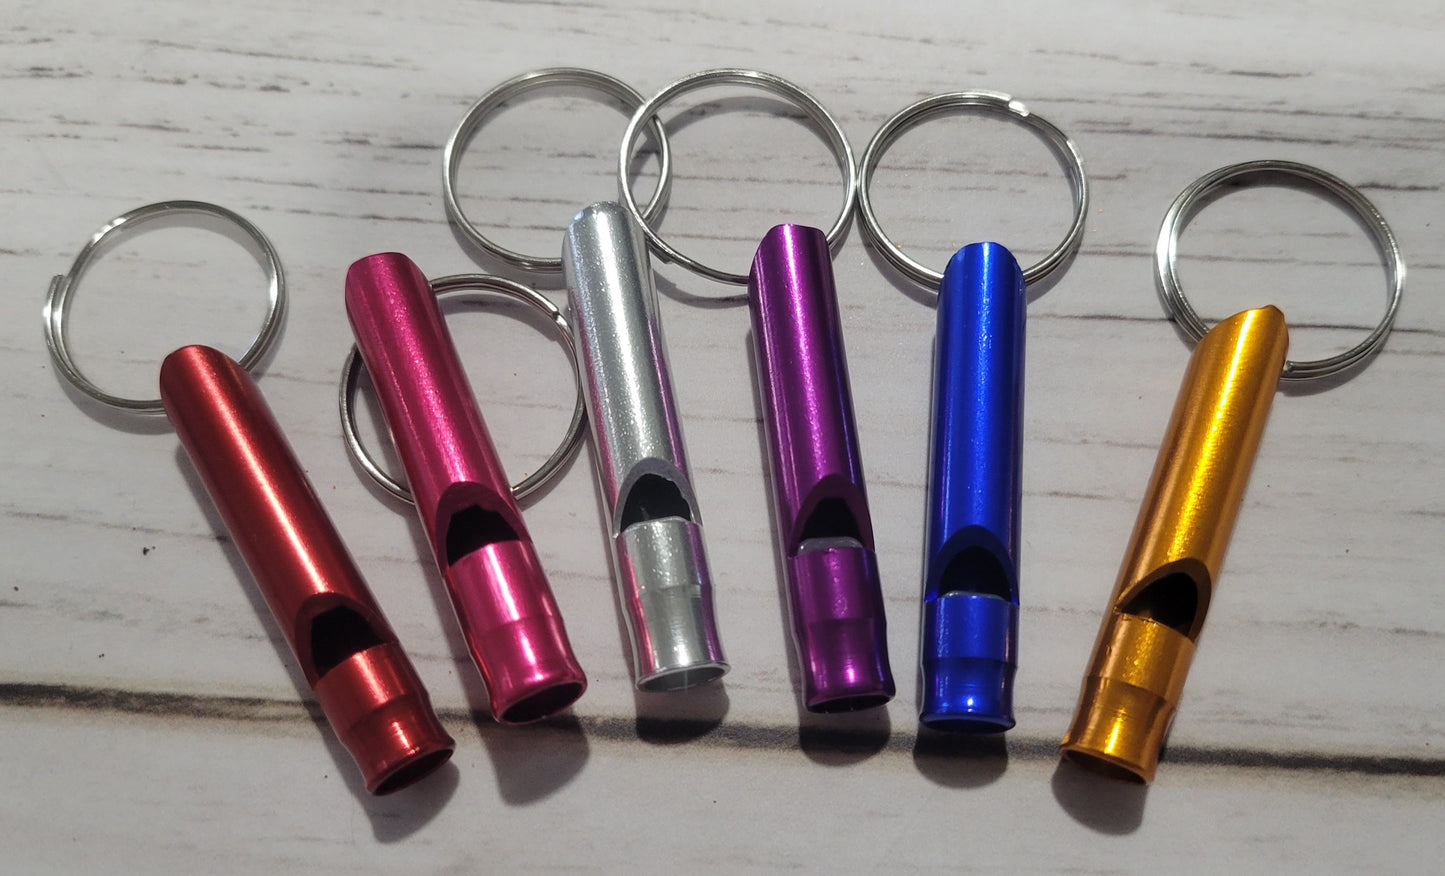 Self Defense Key Chain. Make your own. Accessories